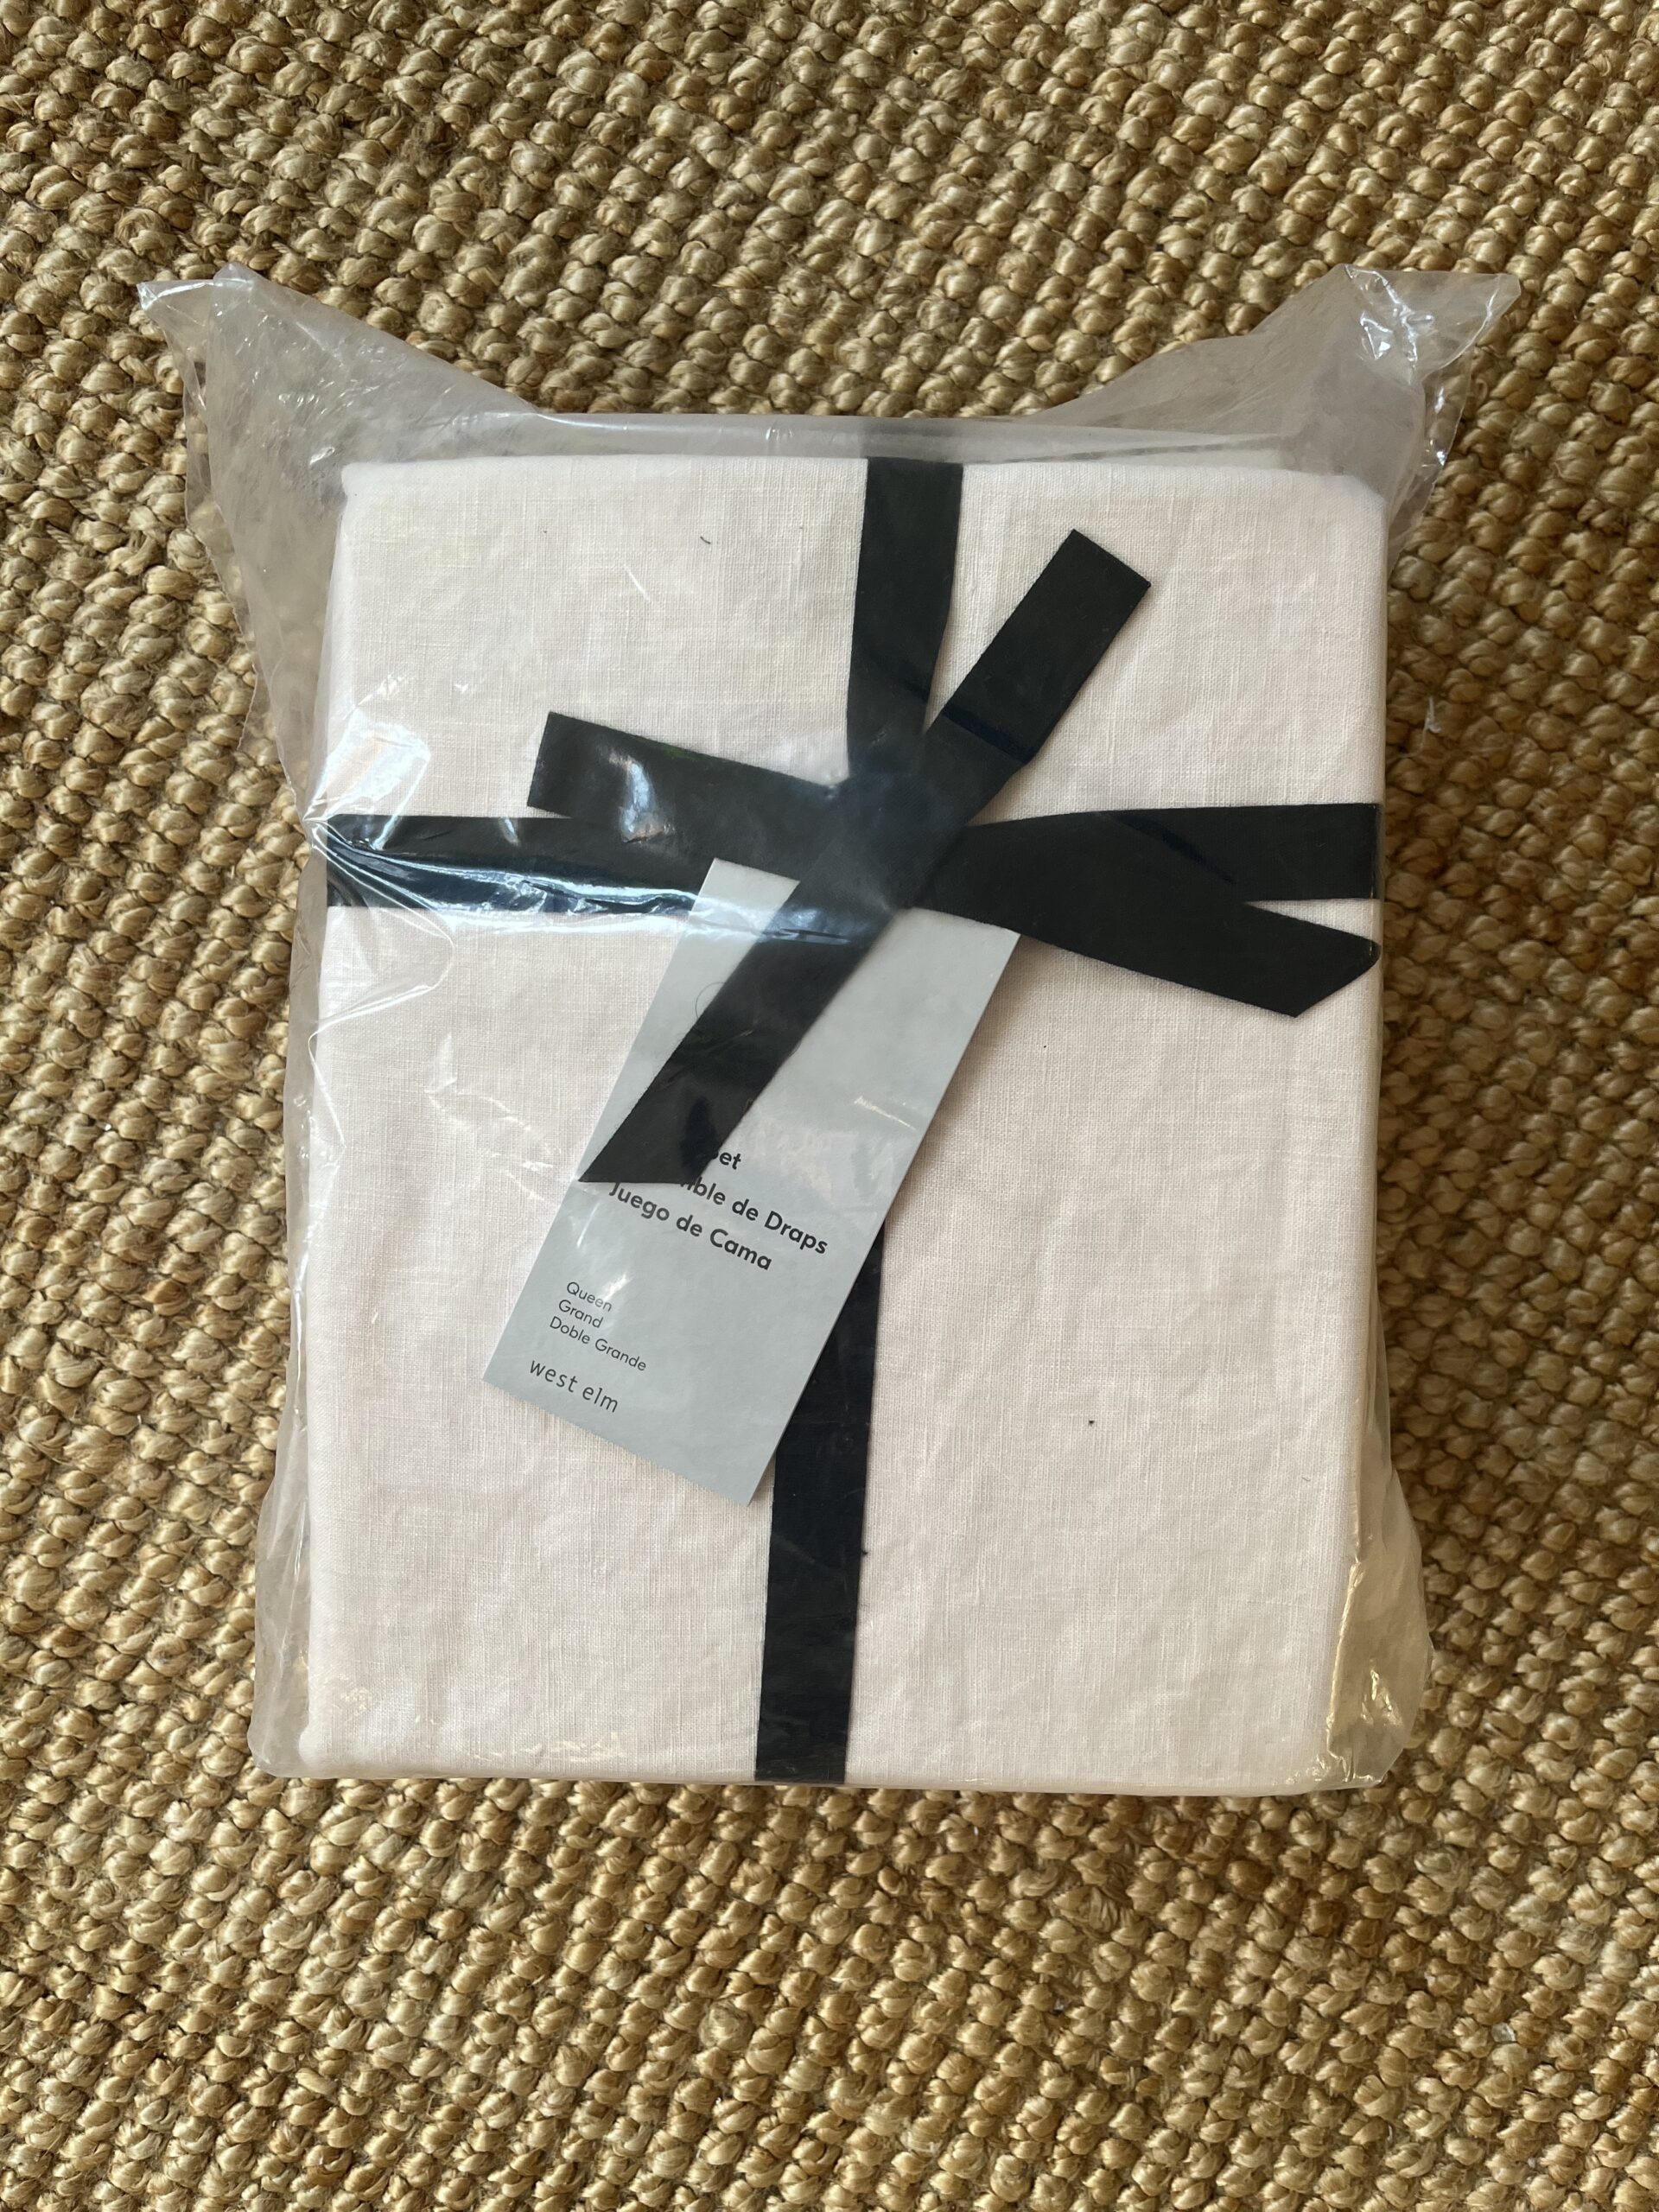 A rectangular white package wrapped in plastic with a black ribbon, placed on a textured woven mat. A label with text is attached to the ribbon.